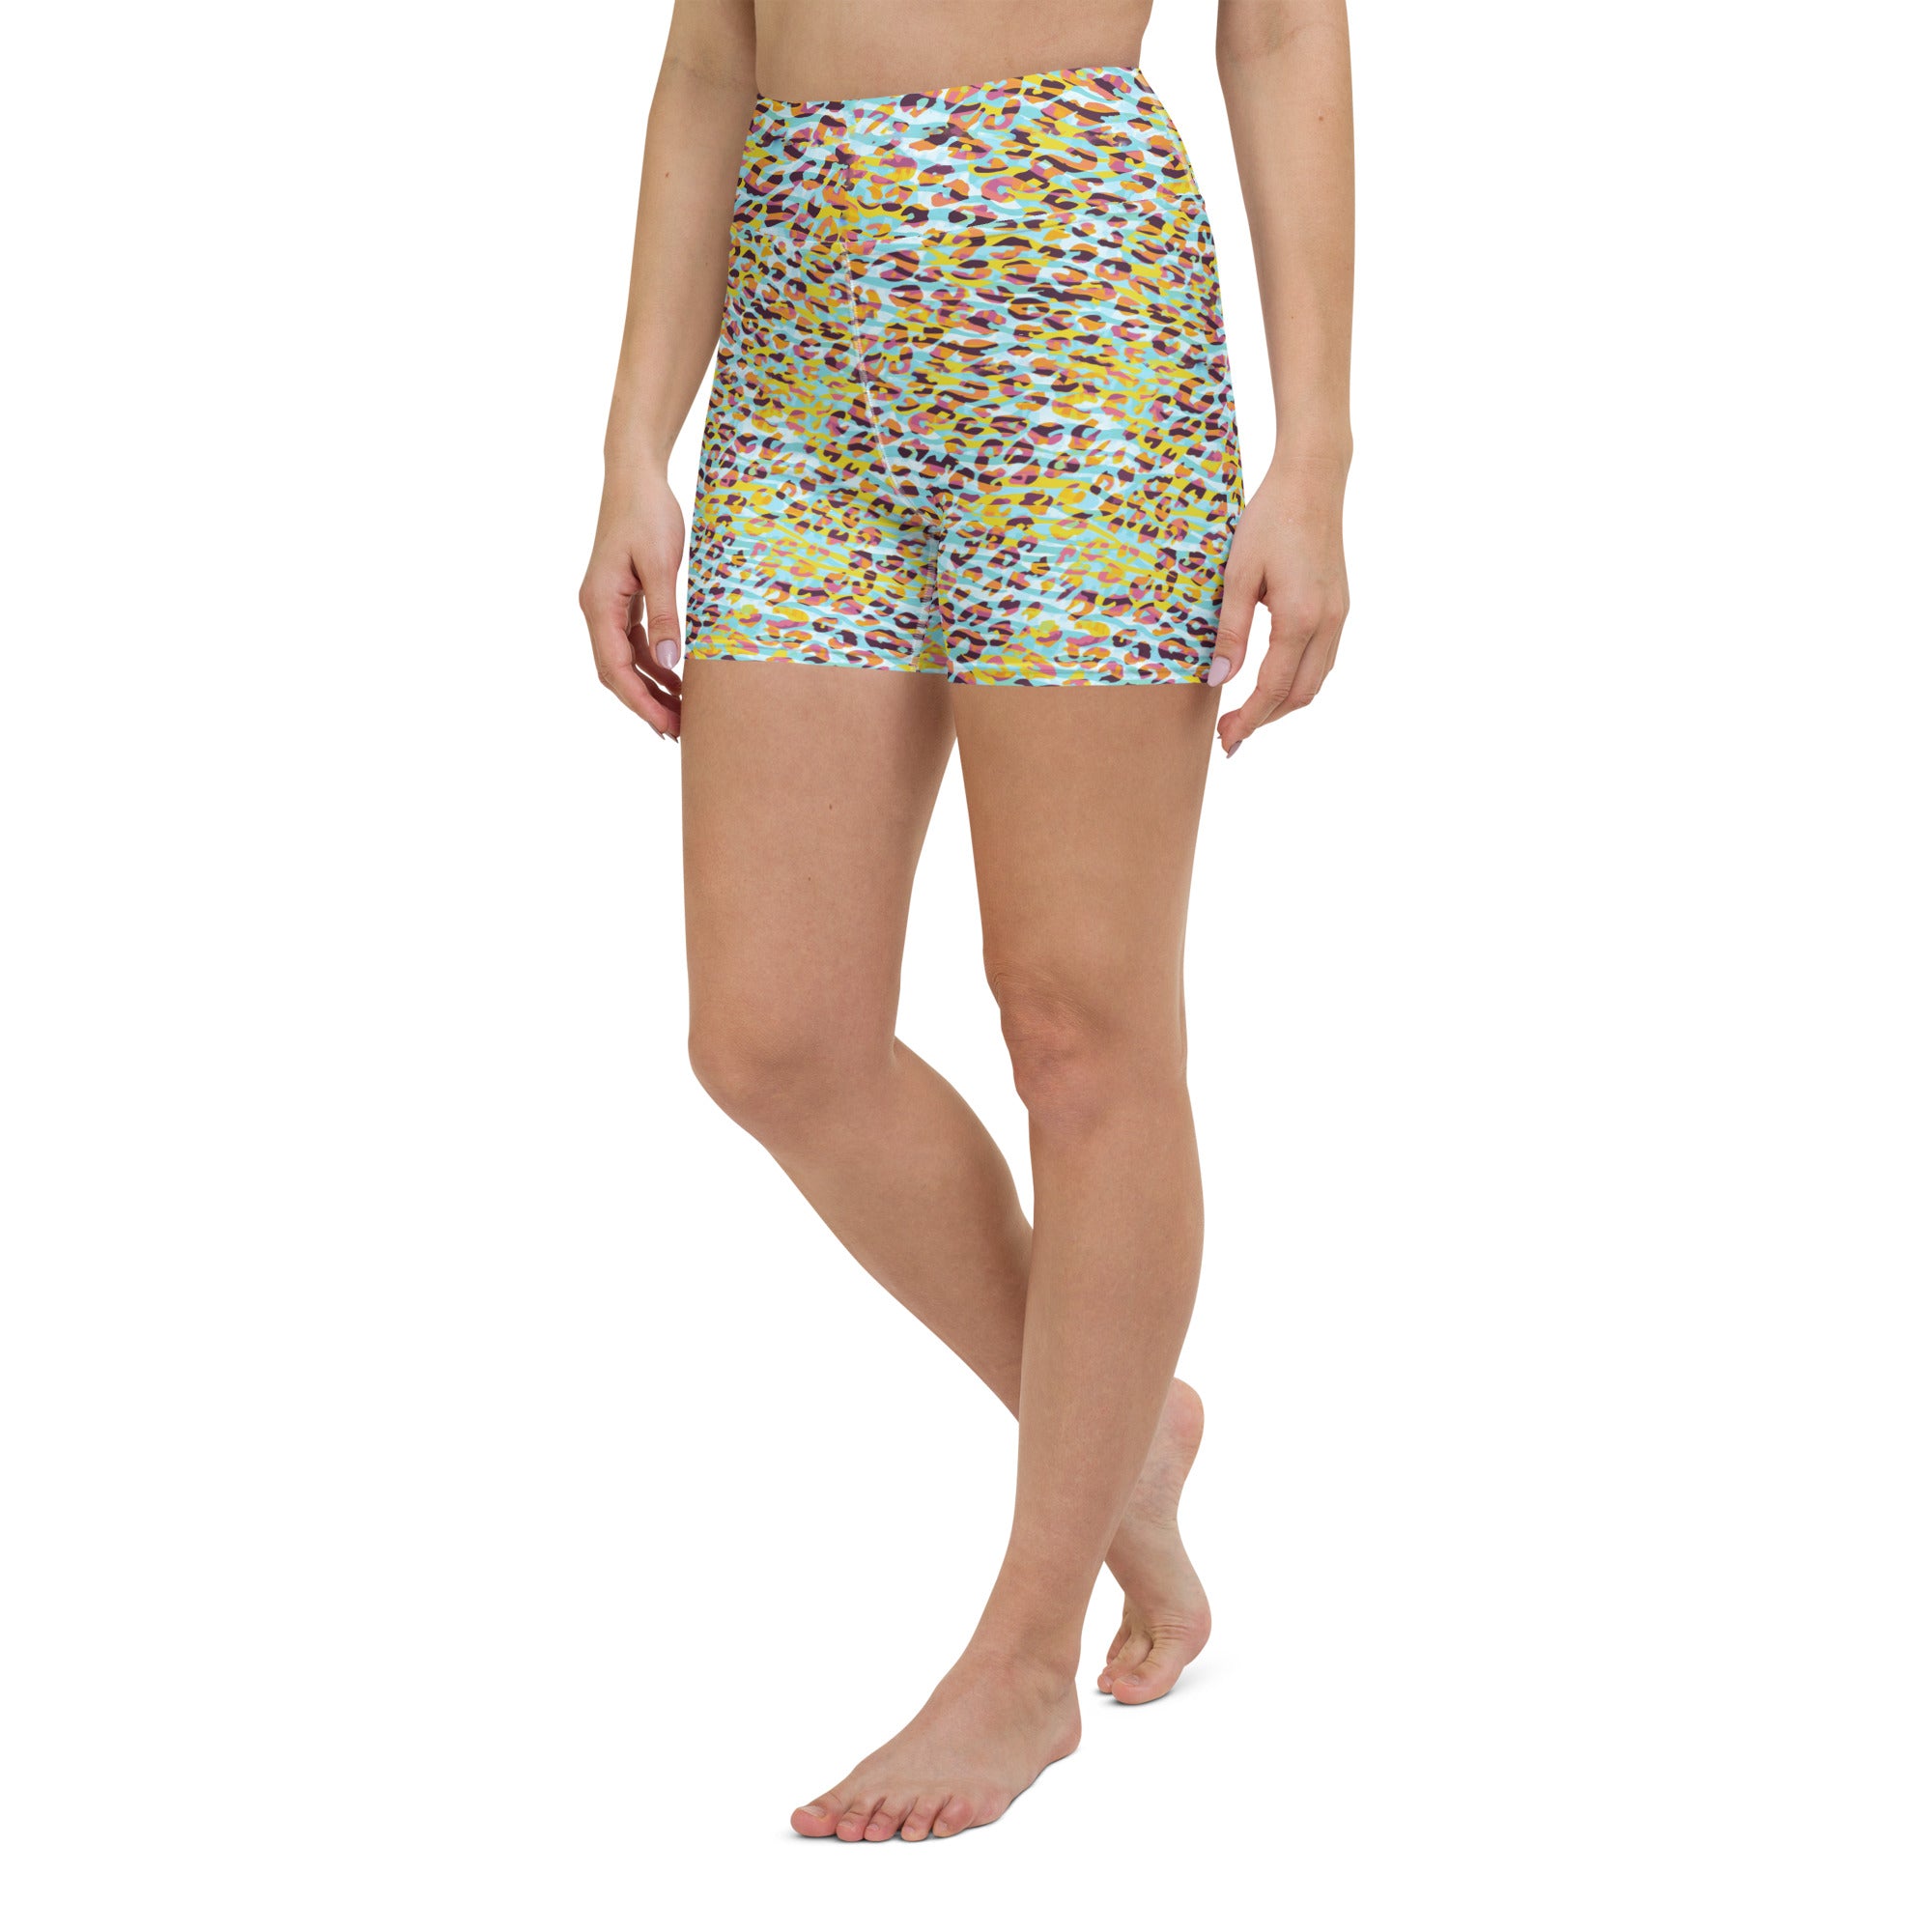 Yoga Shorts- ZEBRA AND LEOPARD PRINT CYAN WITH YELLOW